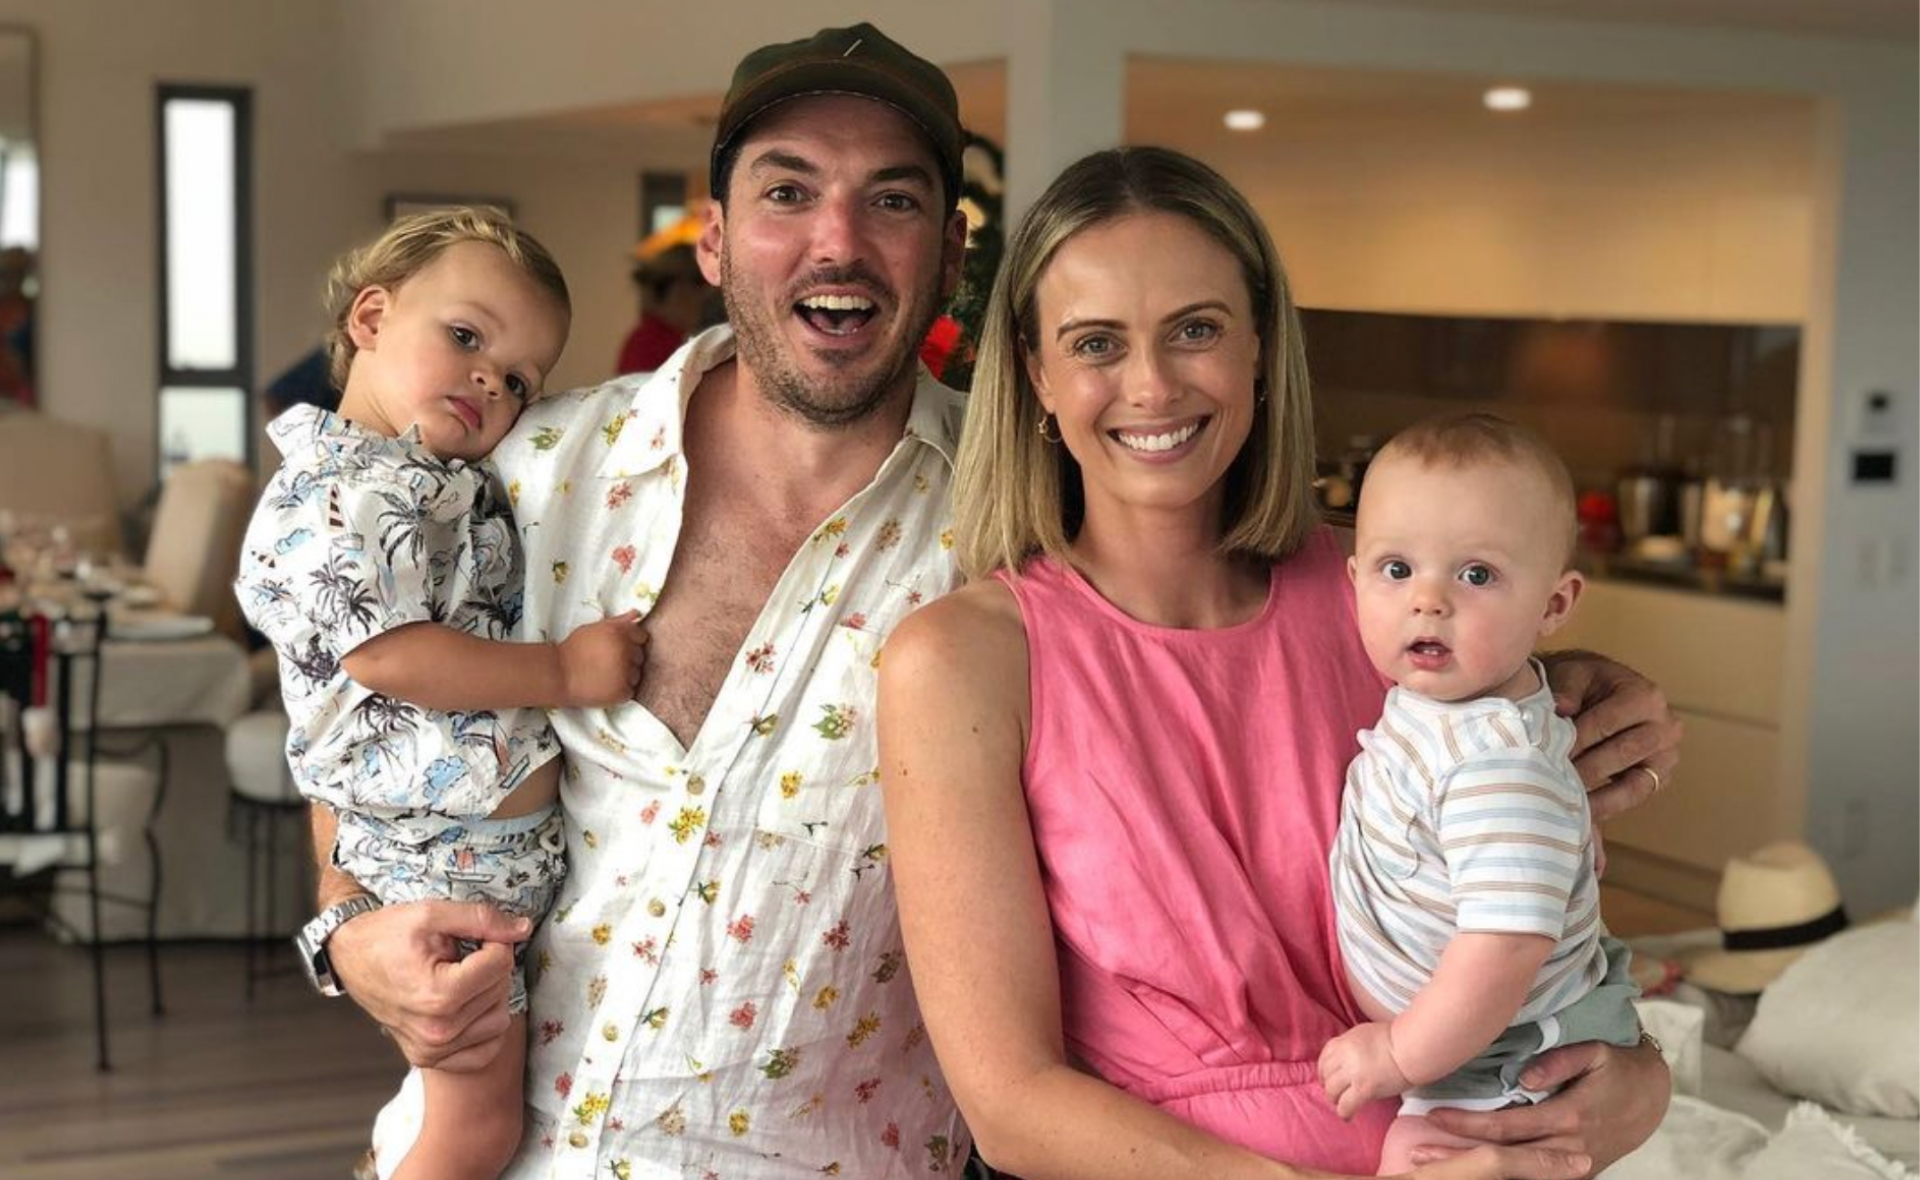 The lucky four! Sylvia Jeffreys and Peter Stefanovic’s cutest family photos with their adorable sons Henry and Oscar